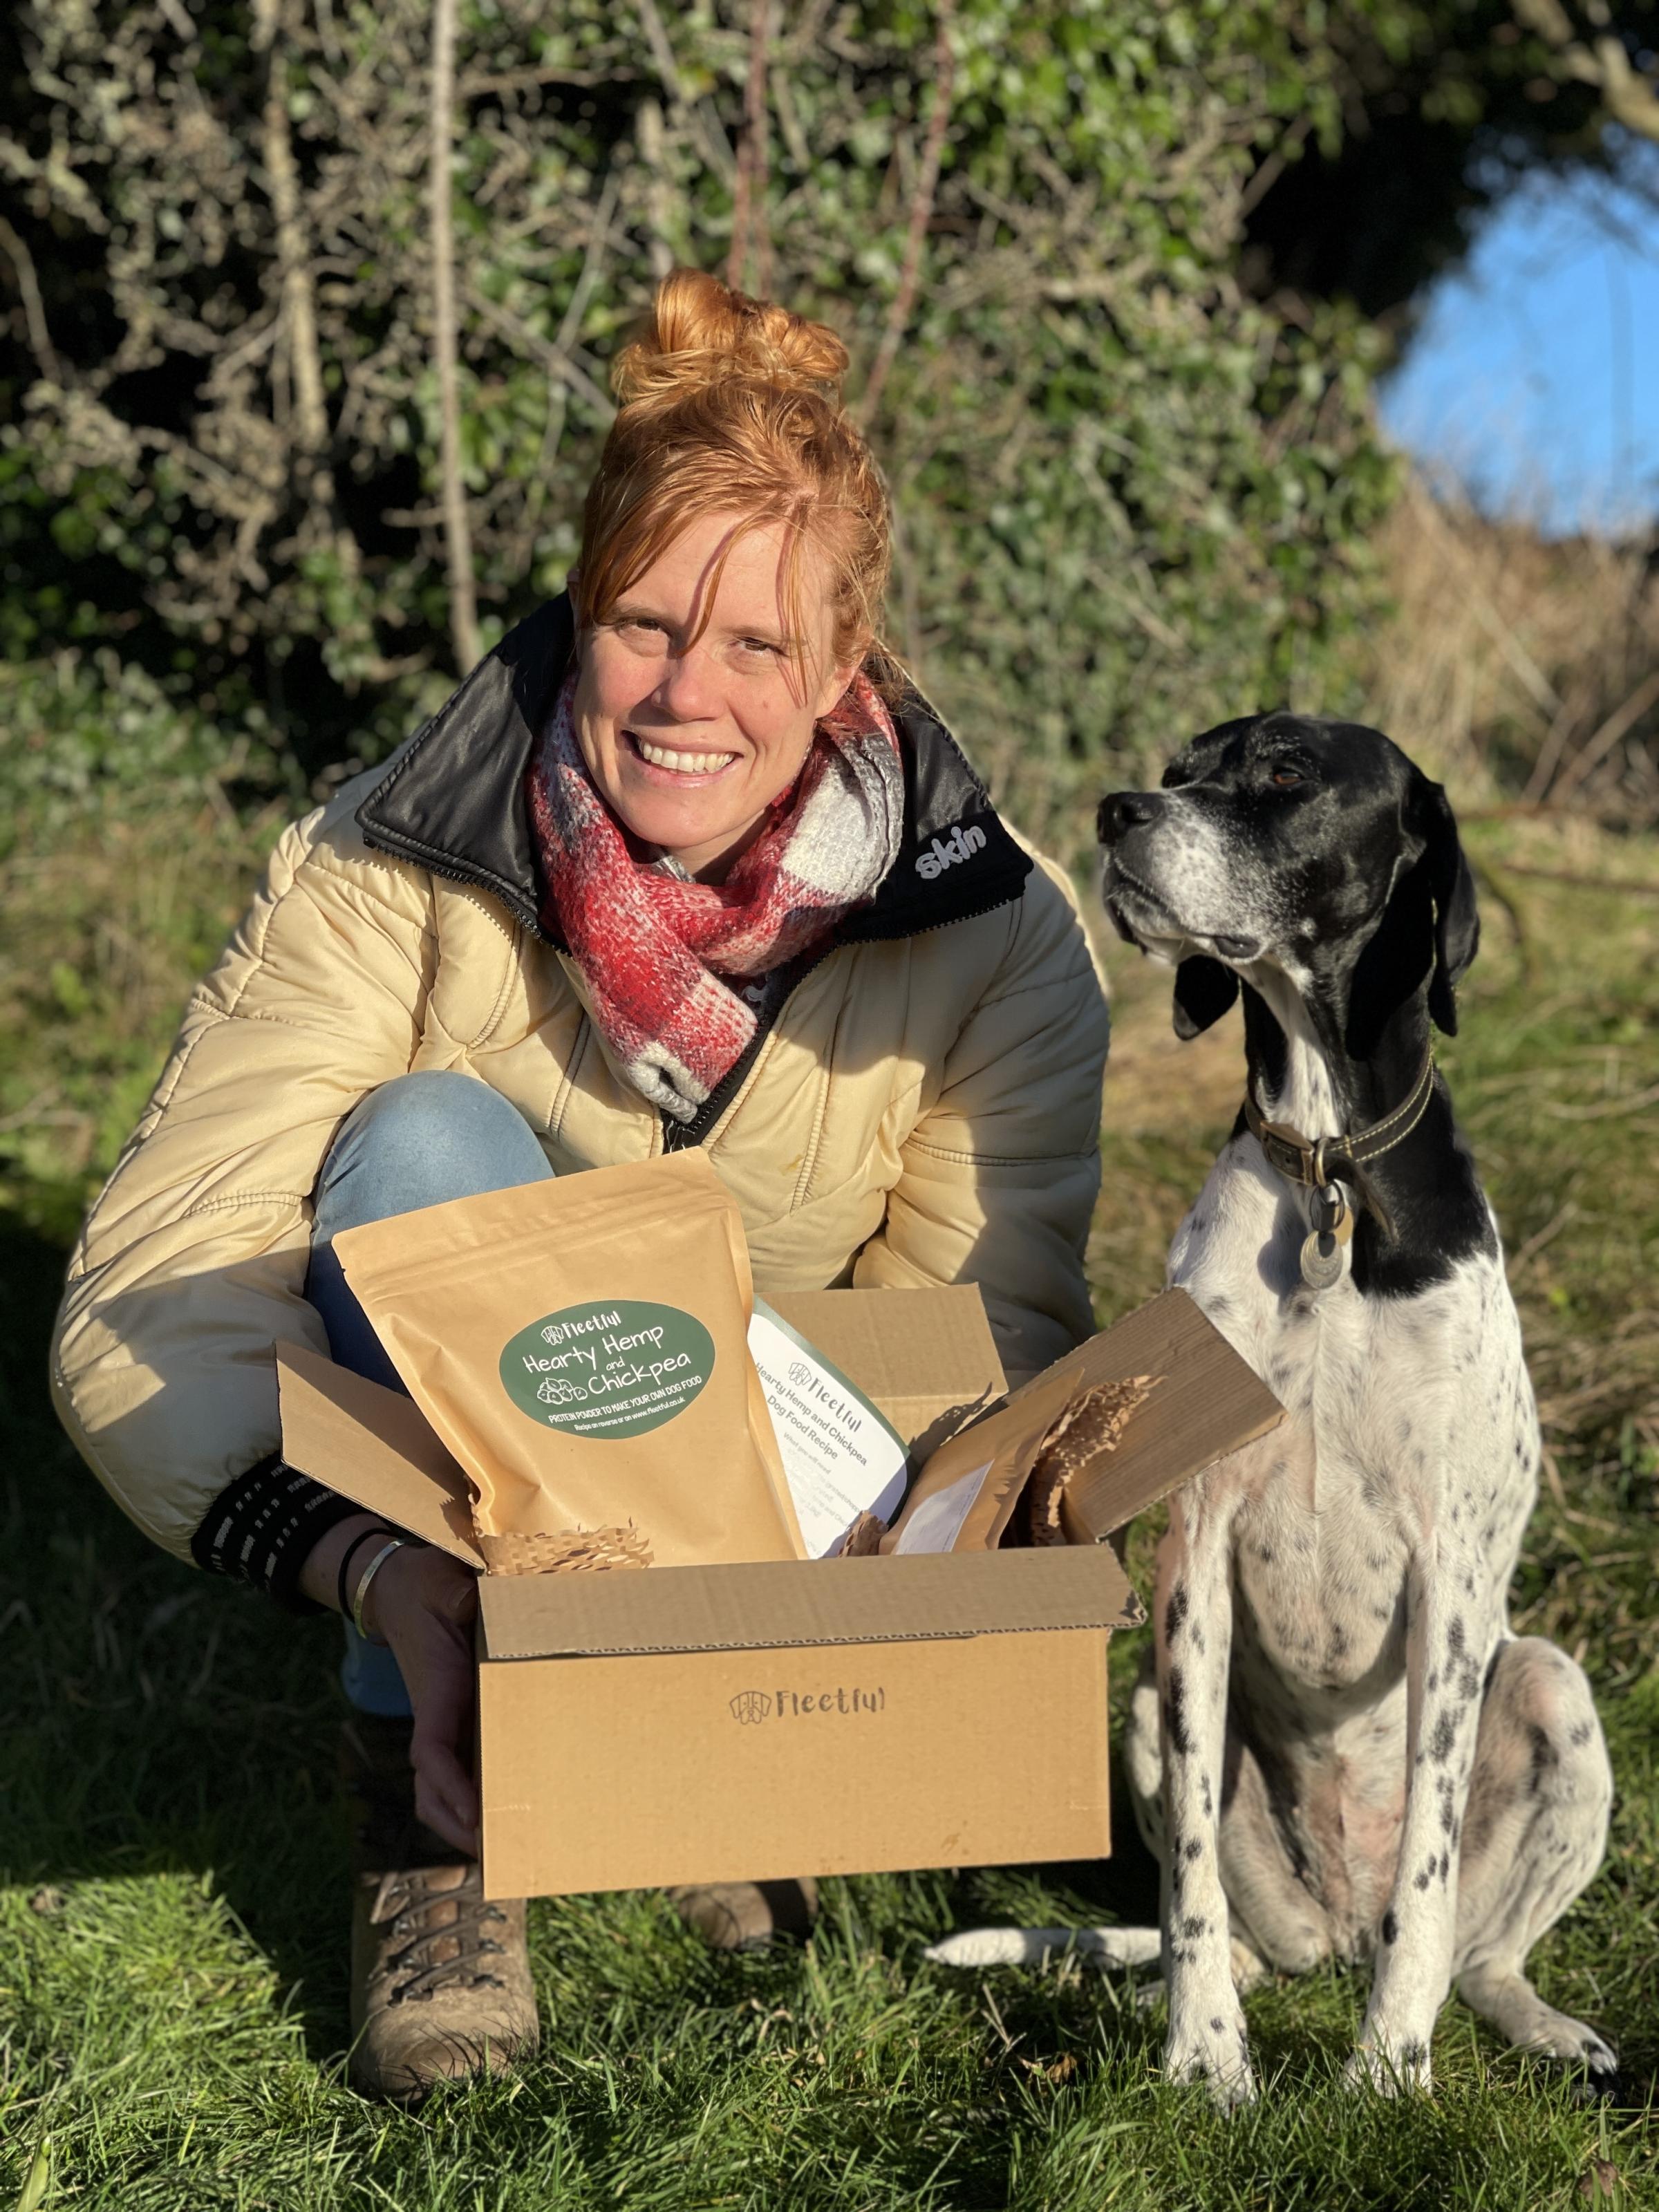 Holly May, from Mold, is on a mission to help combat allergies in dogs with a Dog Food Recipe Kit delivered straight to your door - Fleetful Dog Food Kit. 